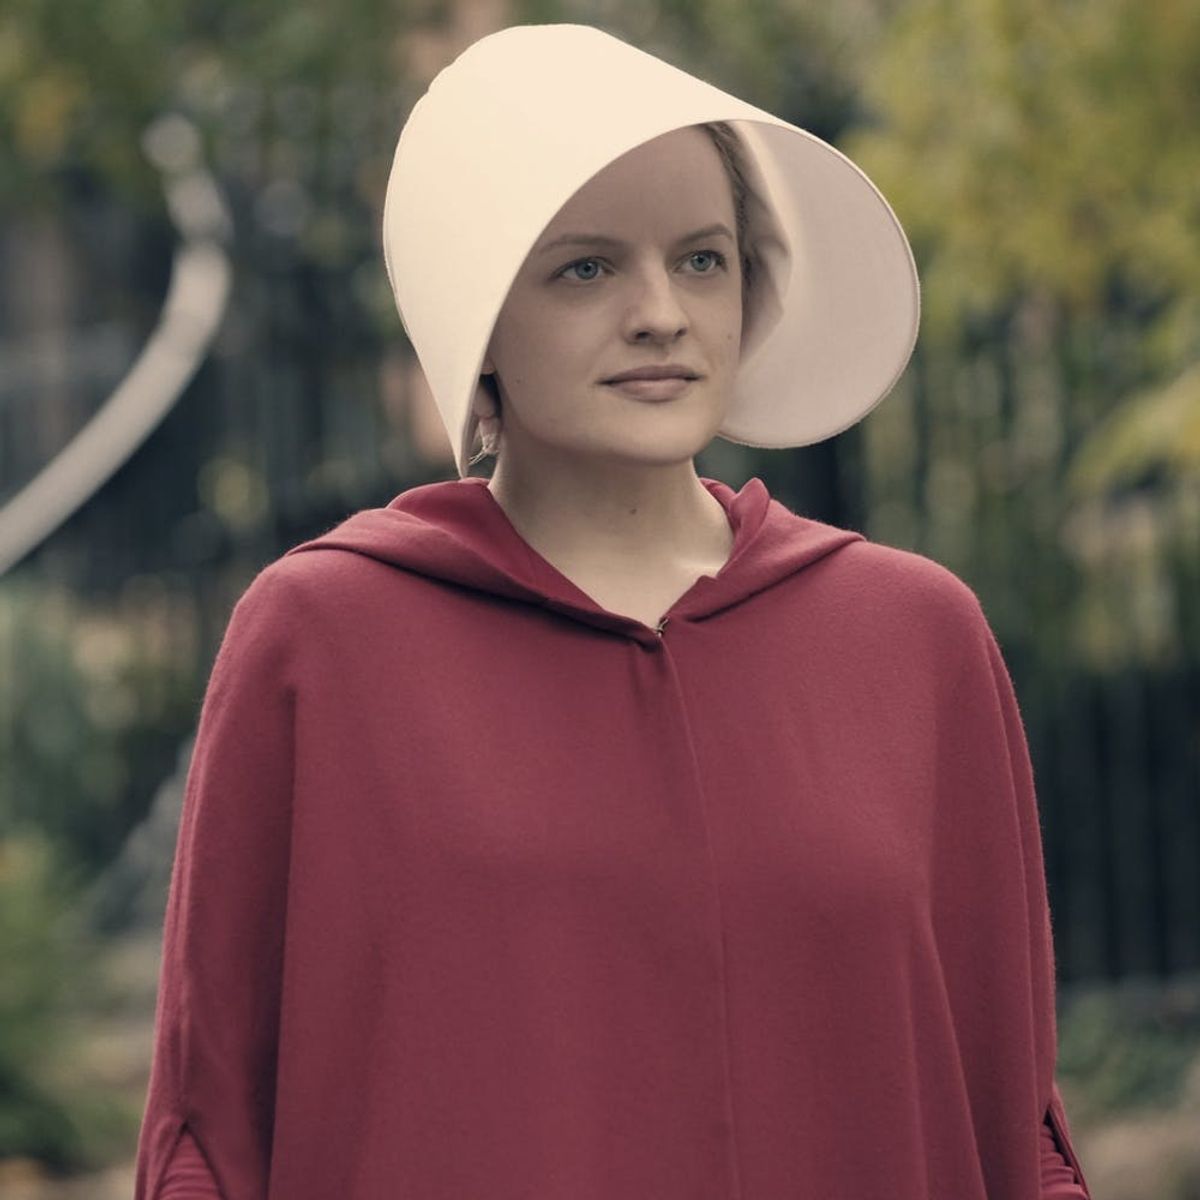 ‘The Handmaid’s Tale’ and 21 Other Must-See TV Shows Based on Books